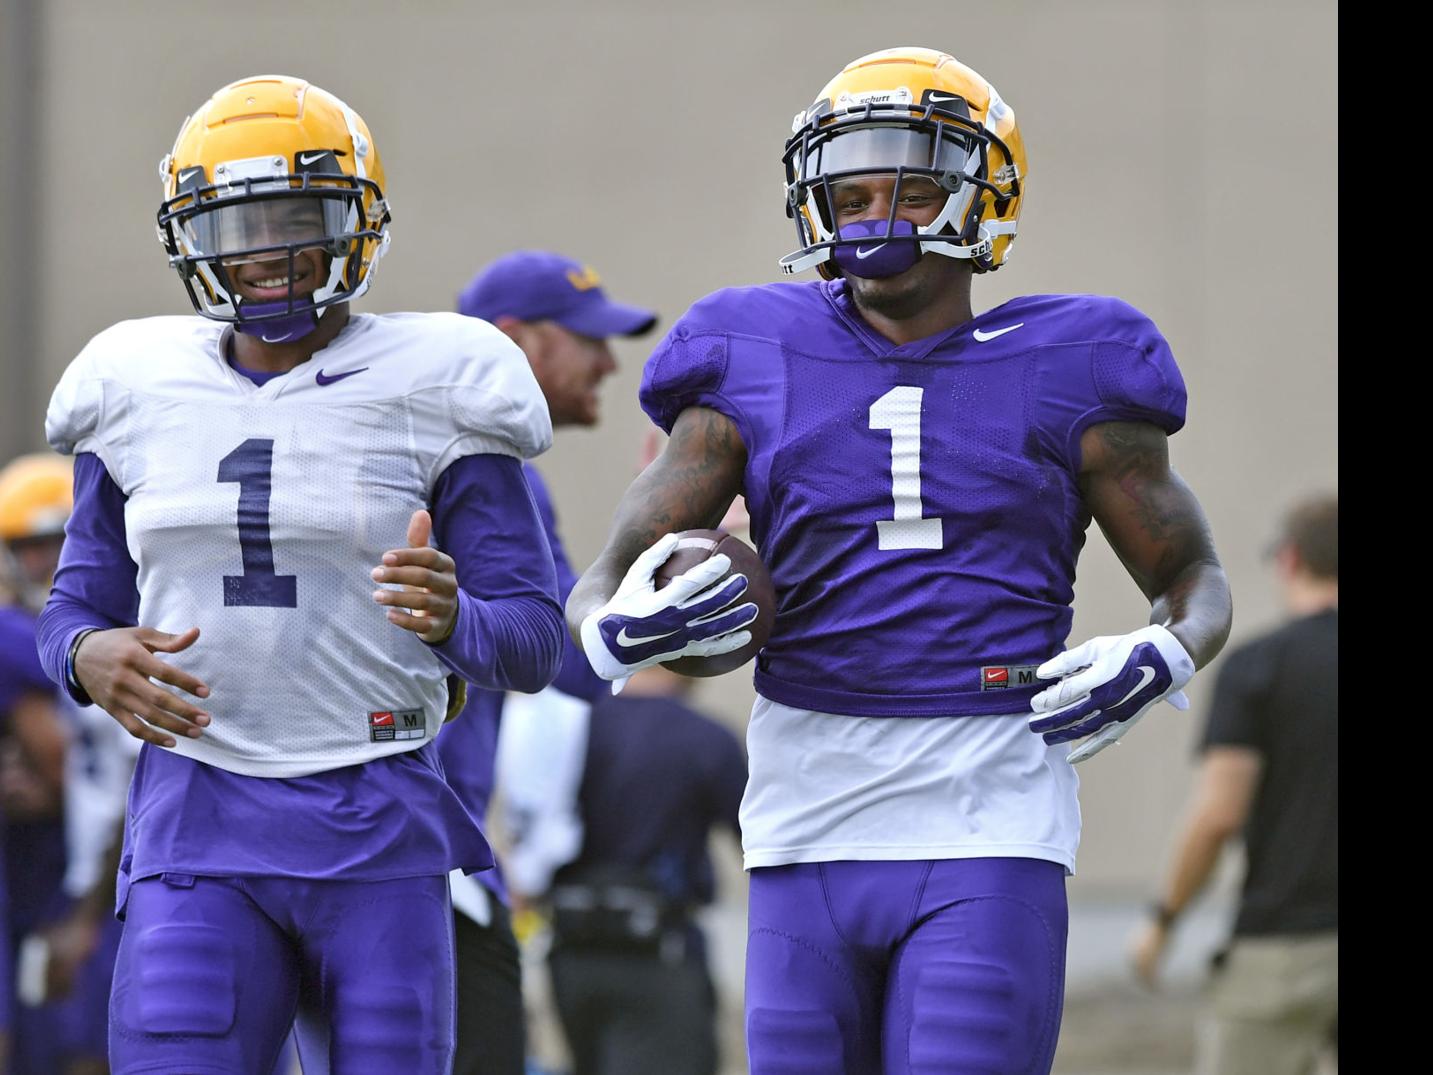 From Rummel to LSU, Ja'Marr Chase and Kristian Fulton followed